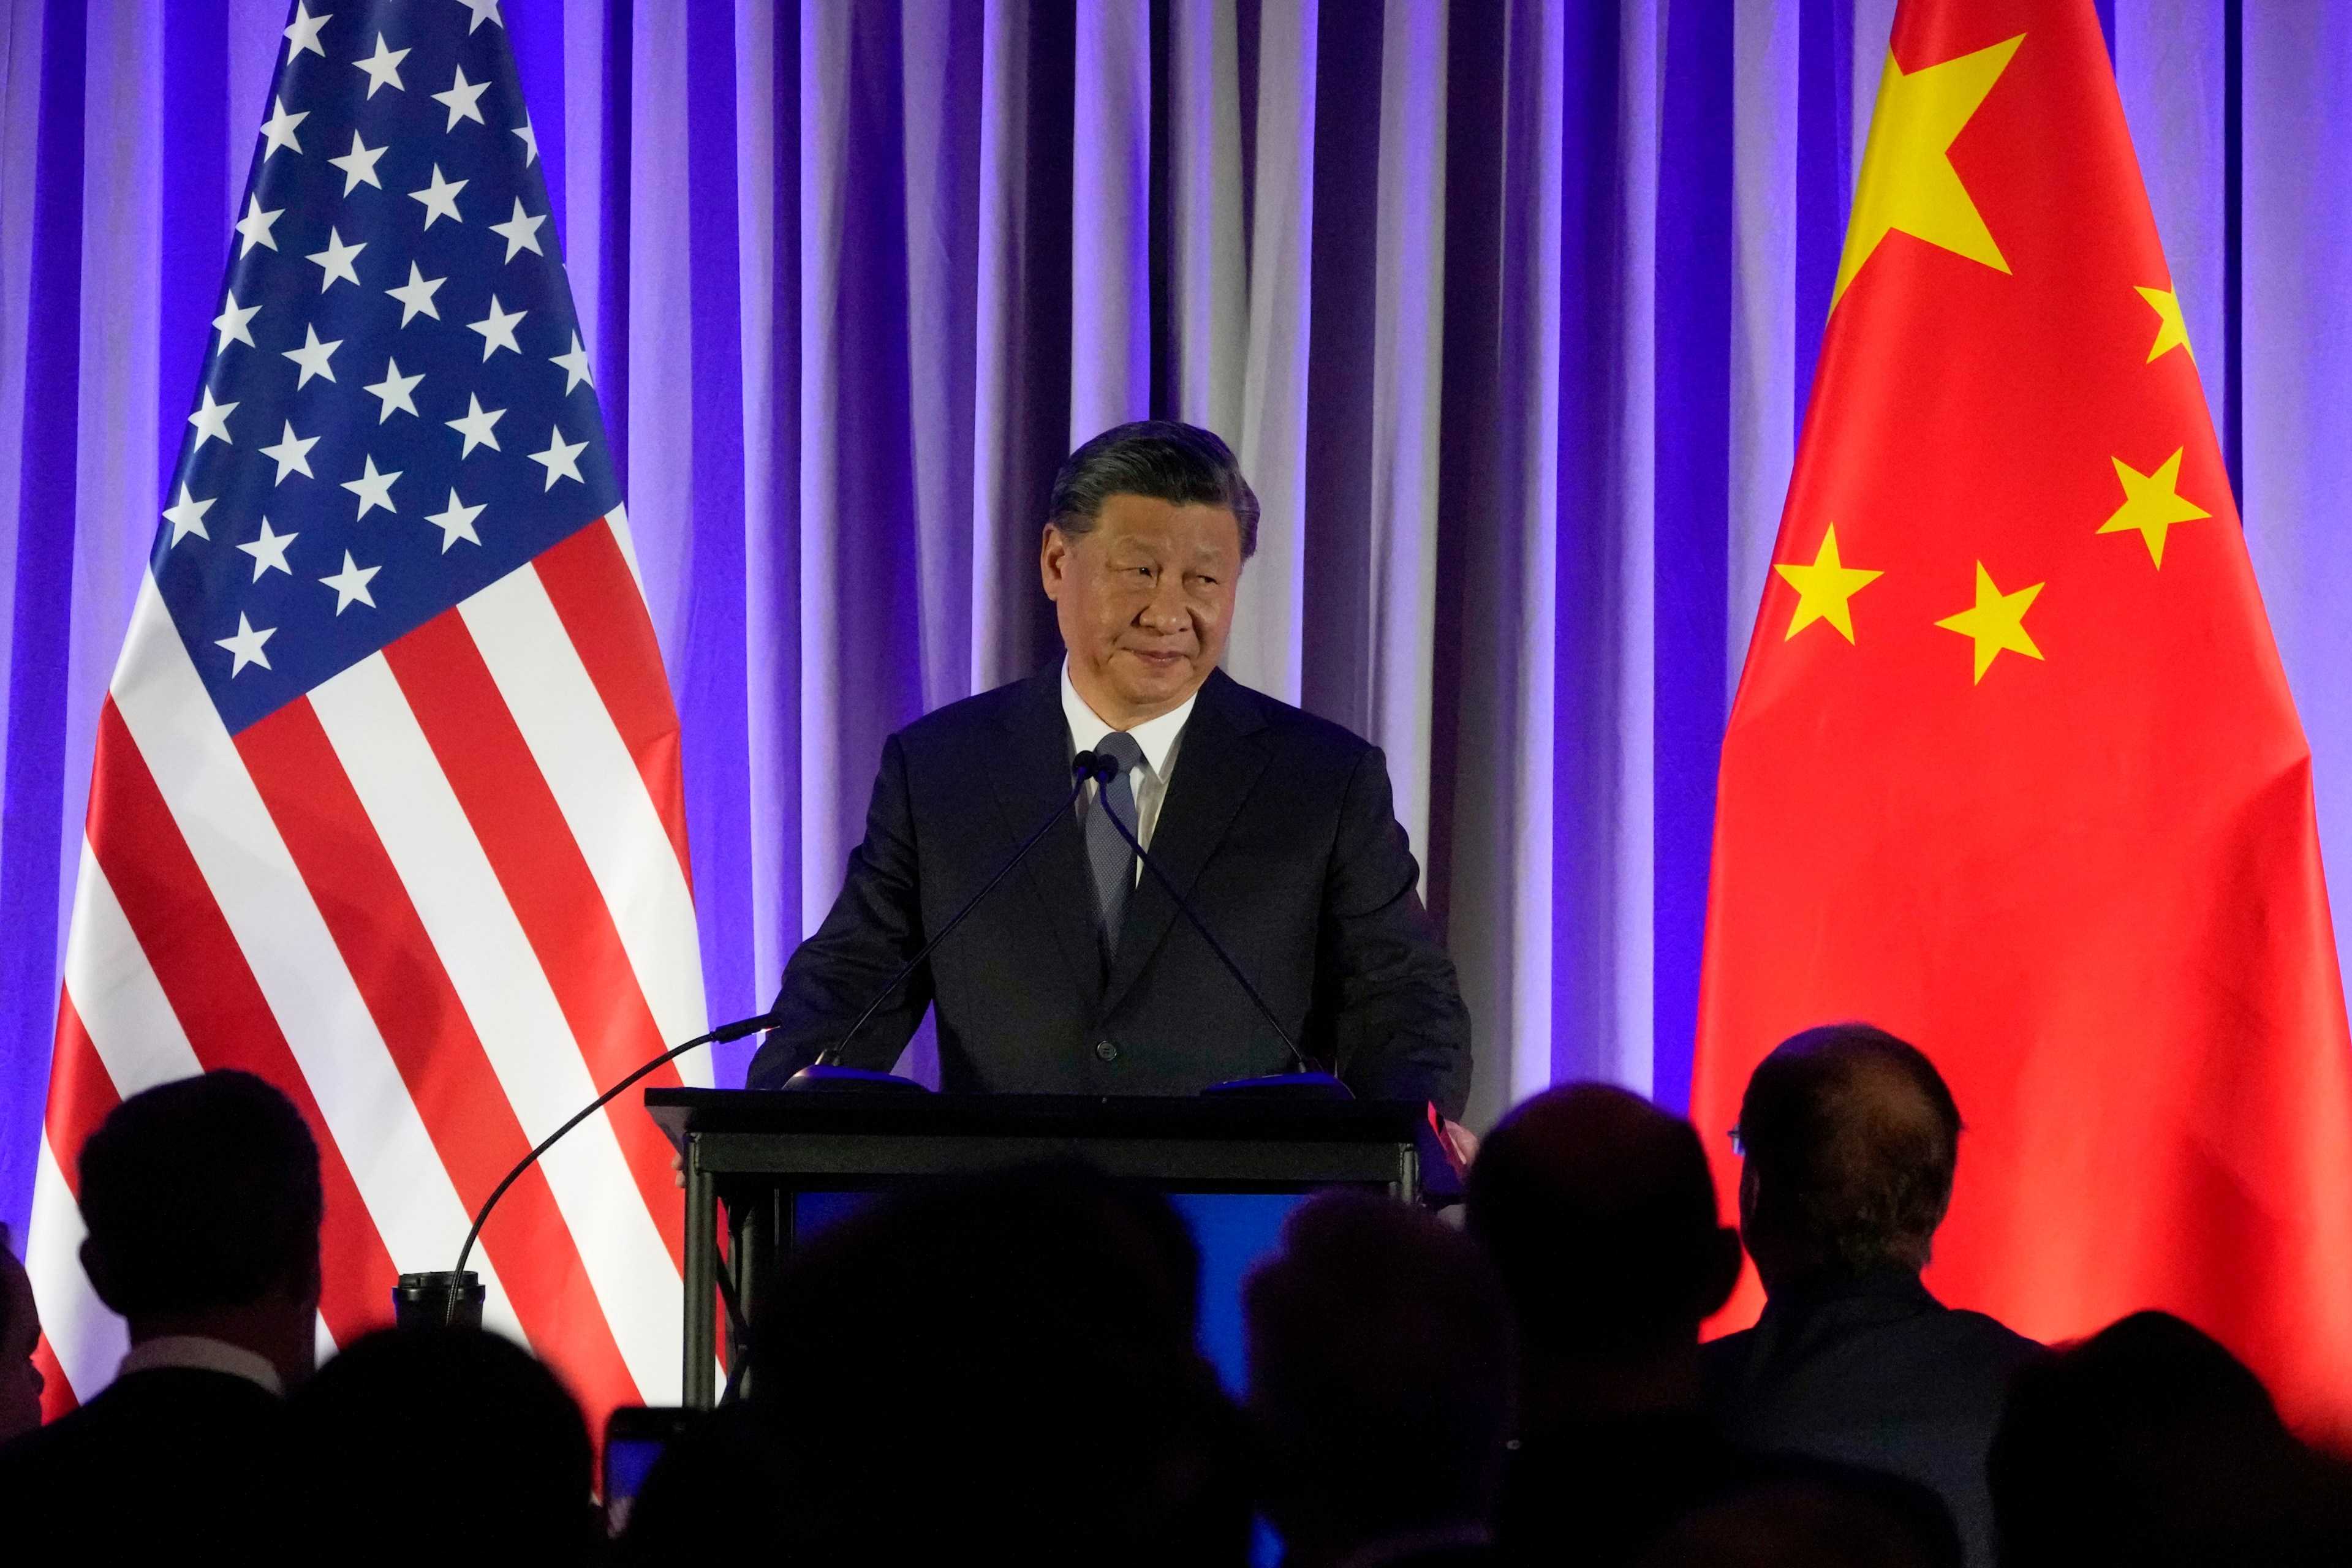 China's President Xi Jinping speaks to a crowd with a large American flag and Chinese flag on both sides of him.